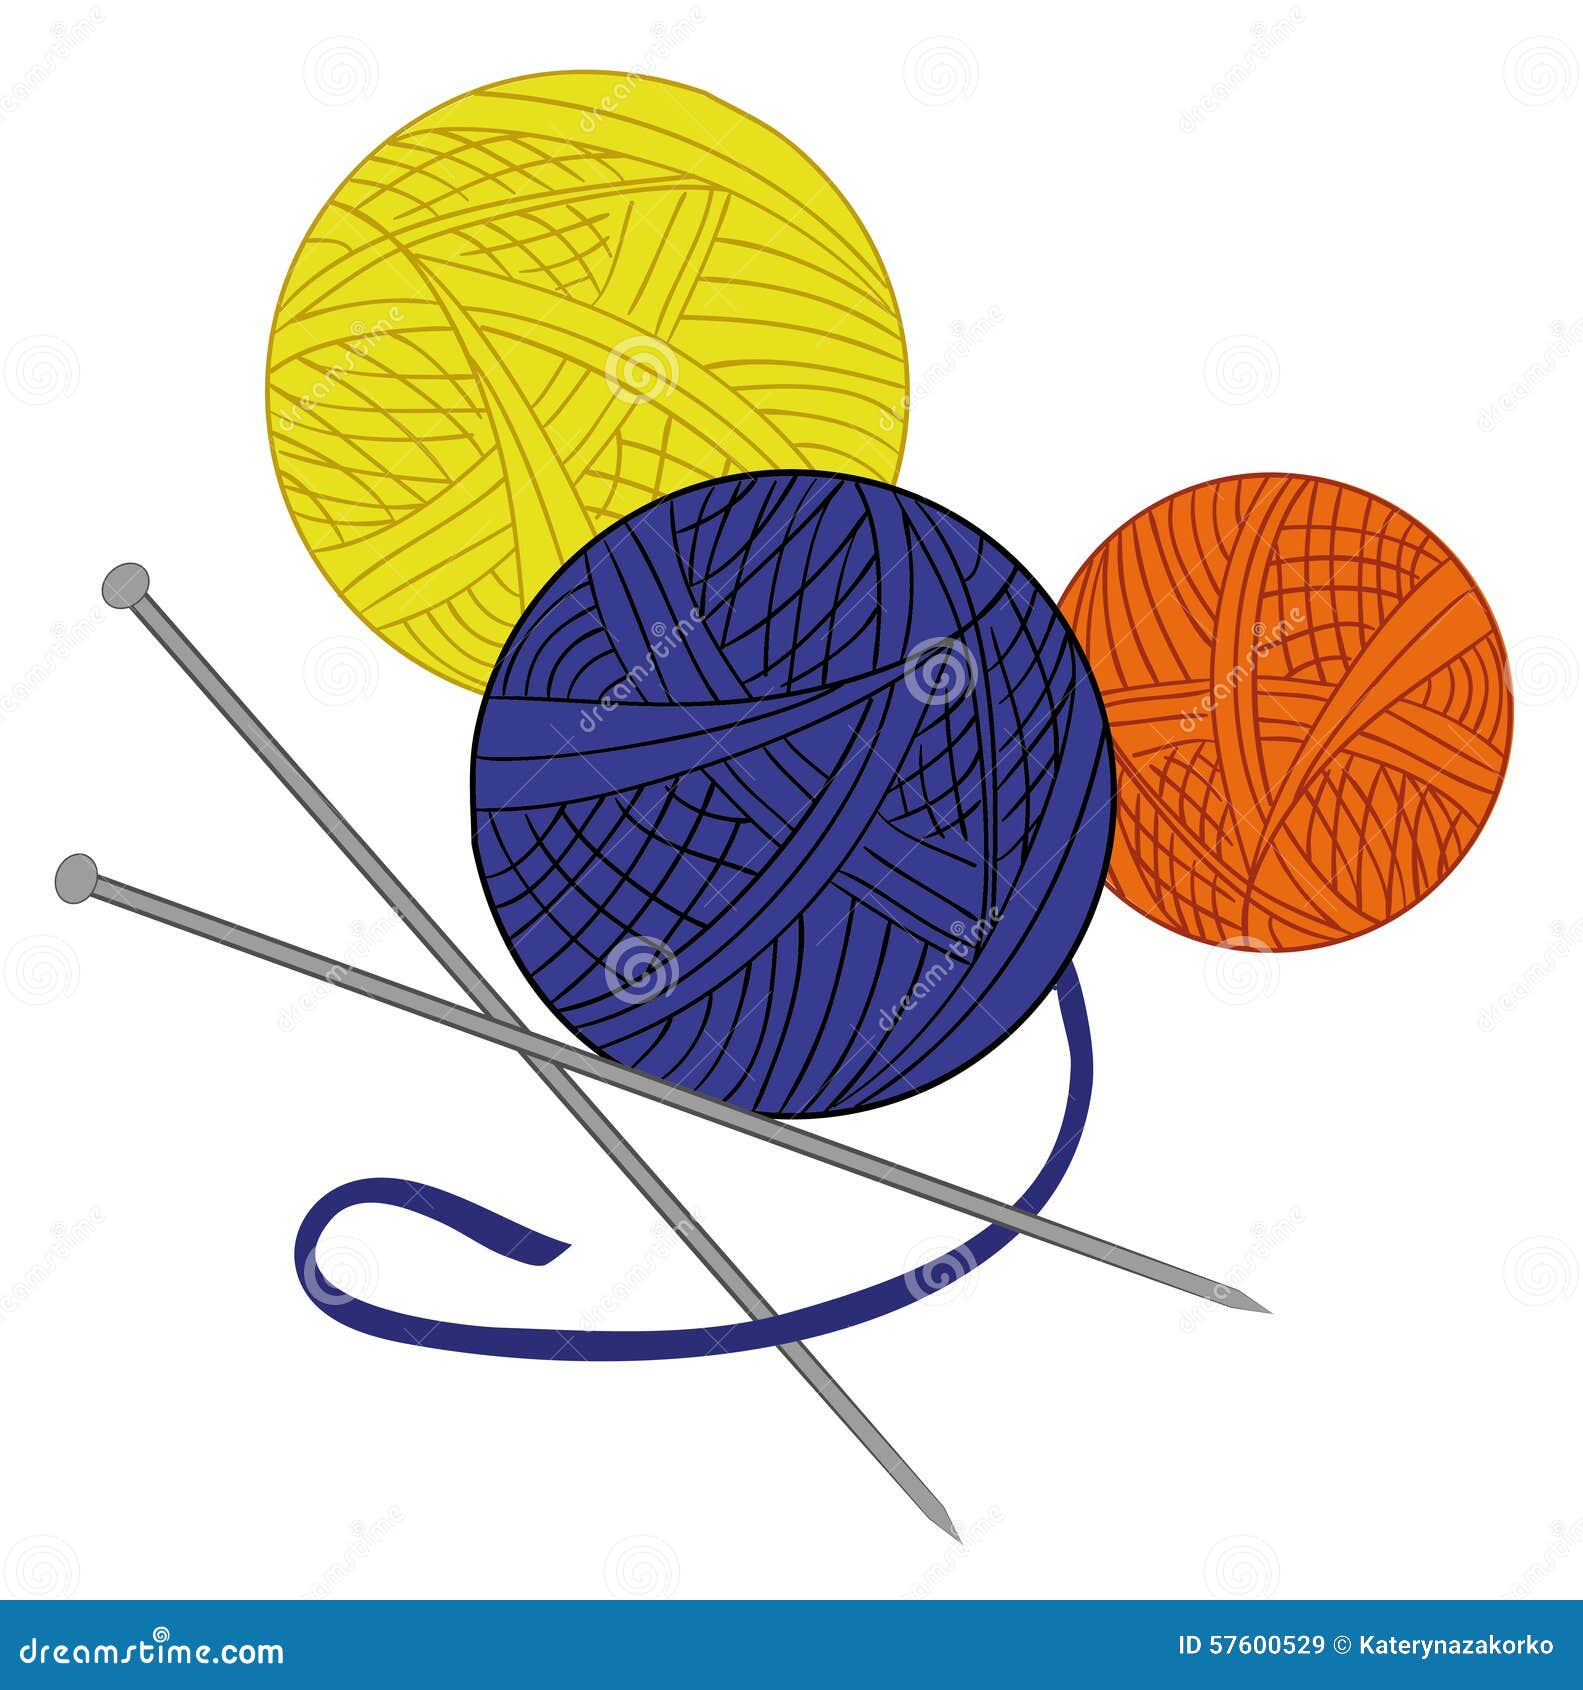 Colored Tangle of Thread and Needles Drawn Vector Stock Vector ...